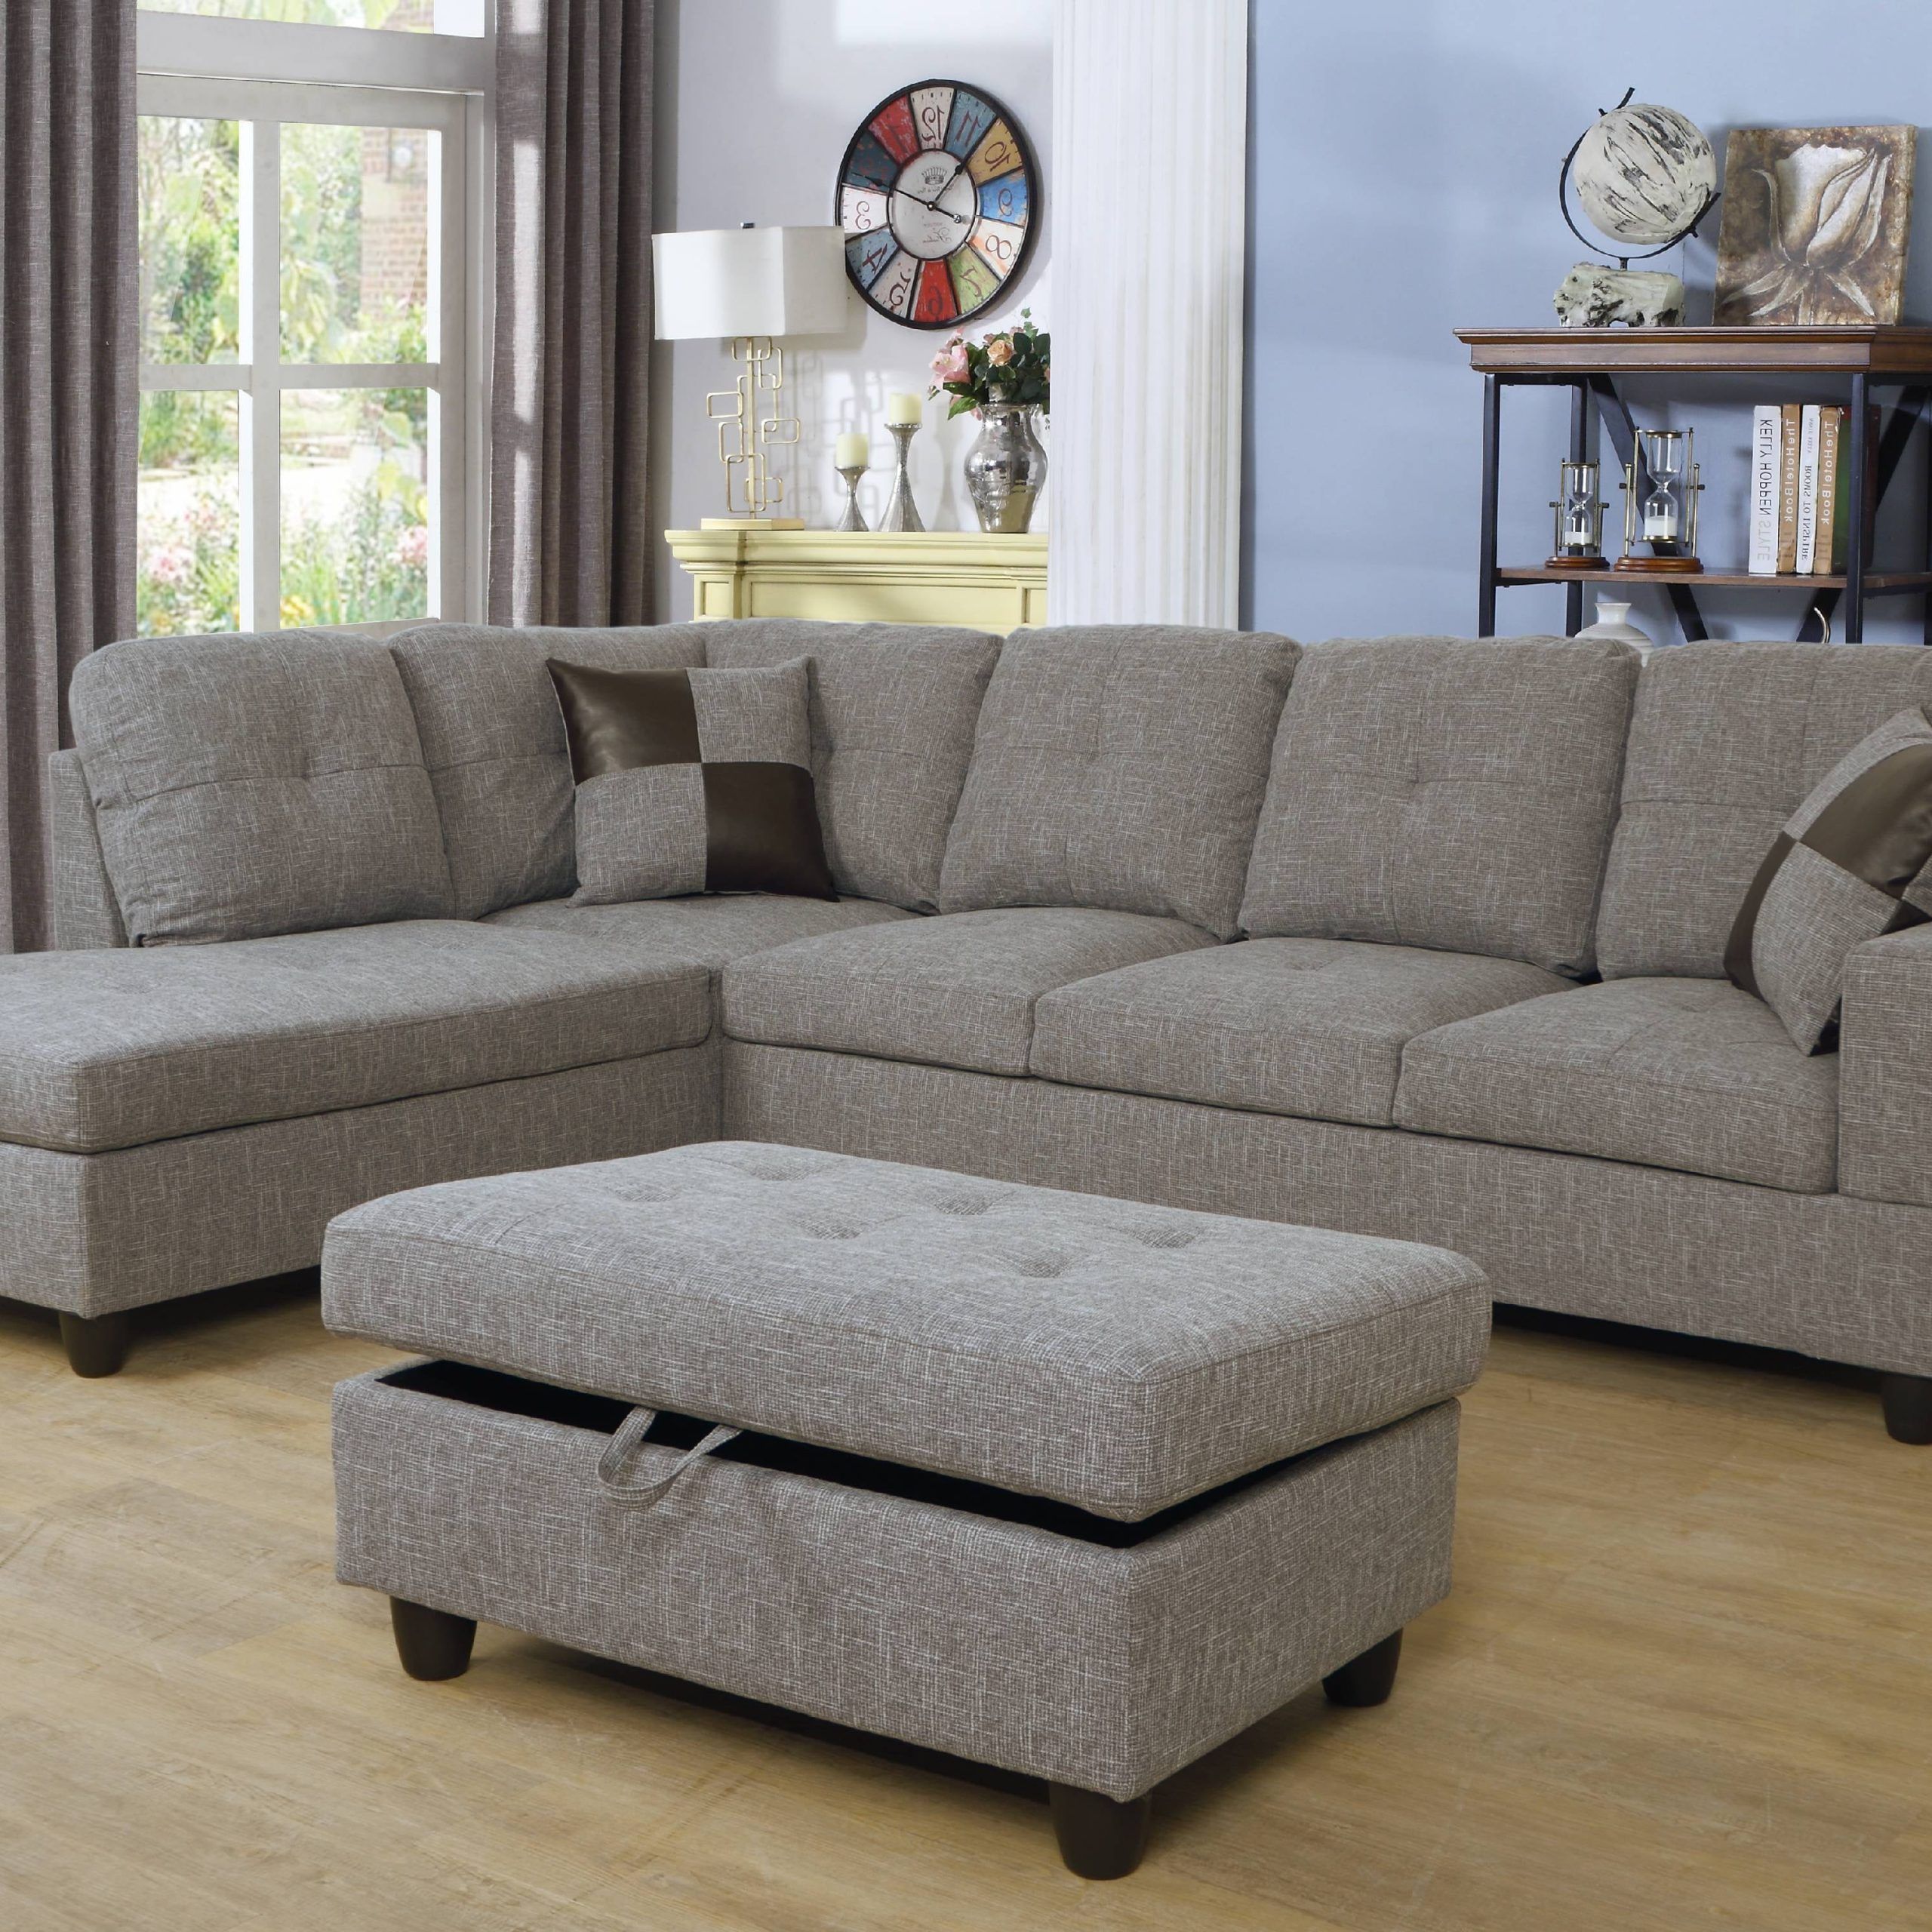 Ashey Furniture – L Shape Sectional Sofa Set With Storage Ottoman Intended For Most Recent Sofas With Ottomans (View 13 of 15)